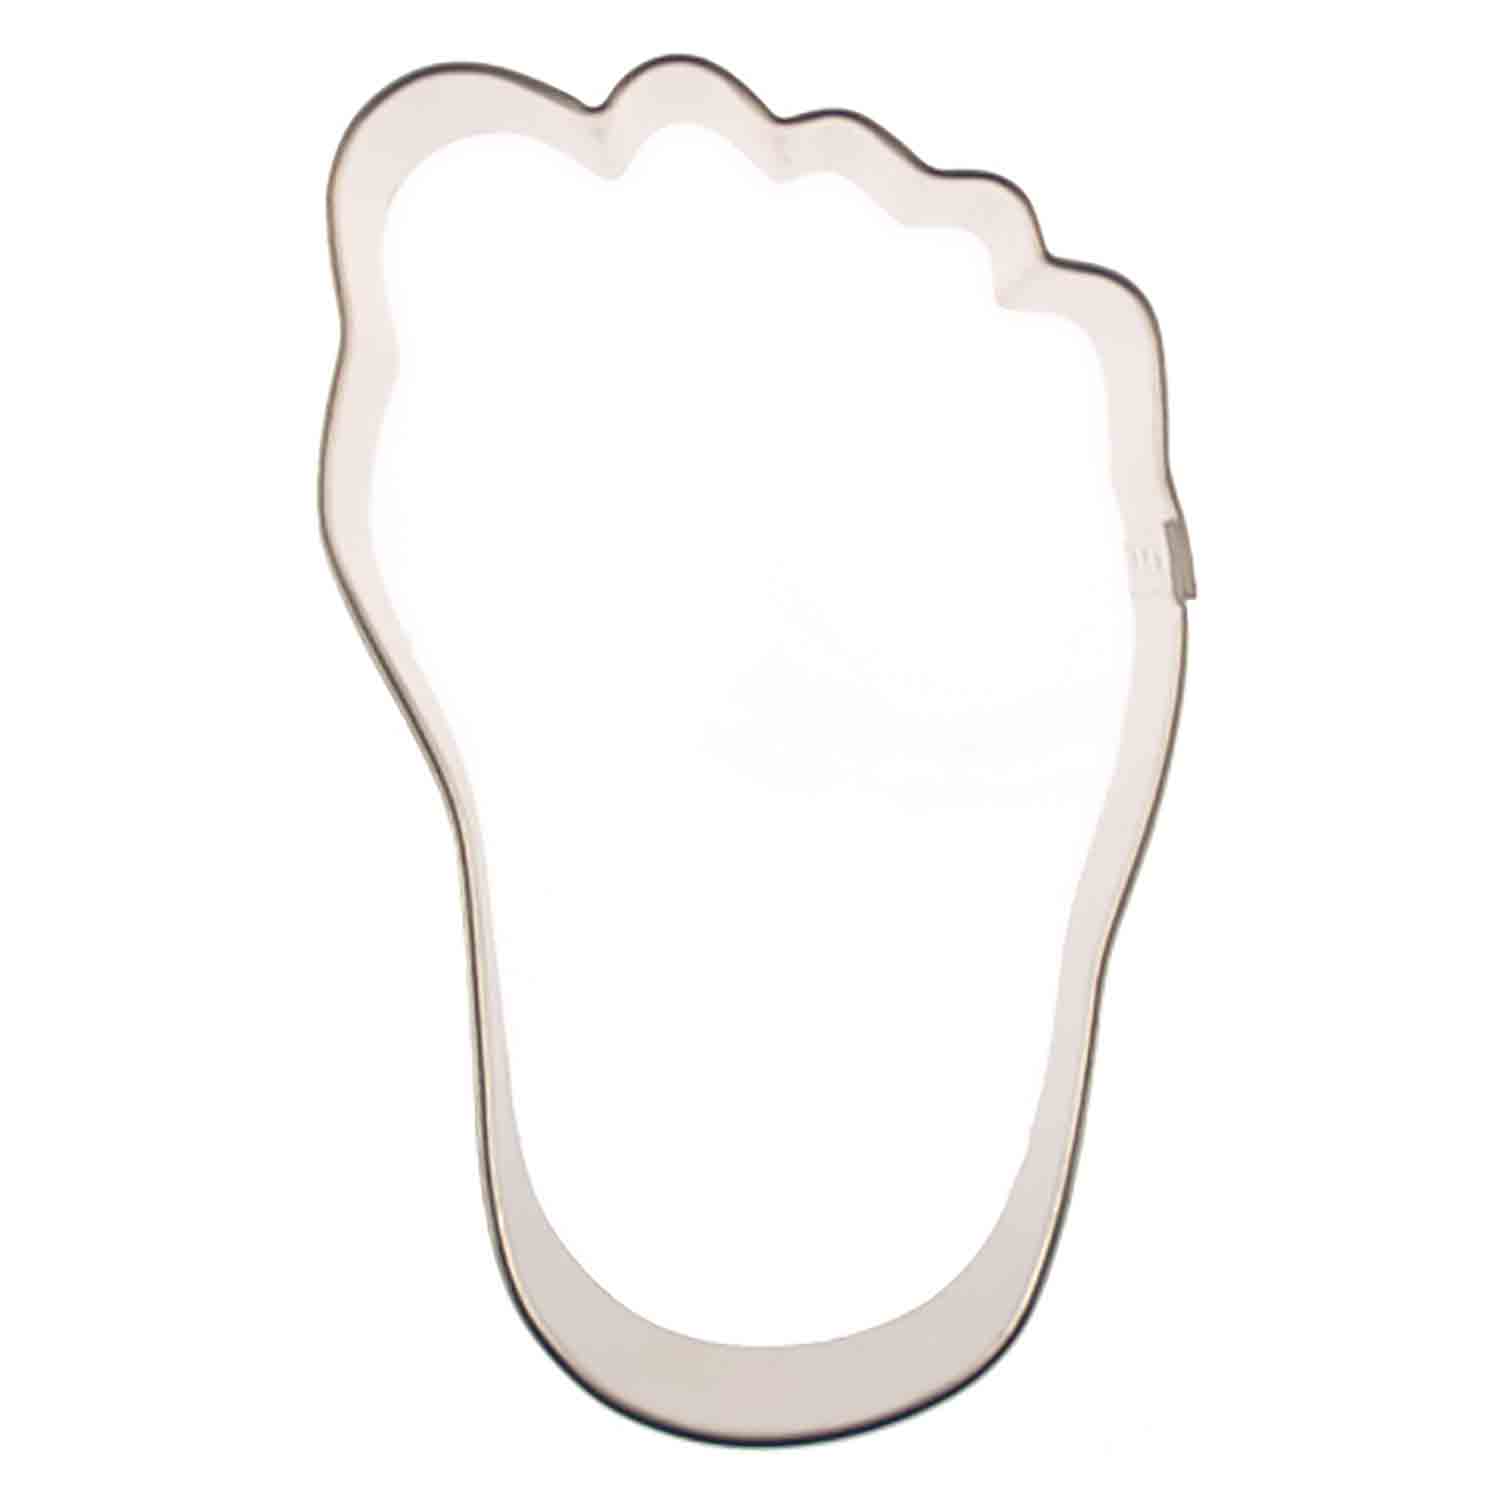 Foot Cookie Cutter | Country Kitchen SweetArt